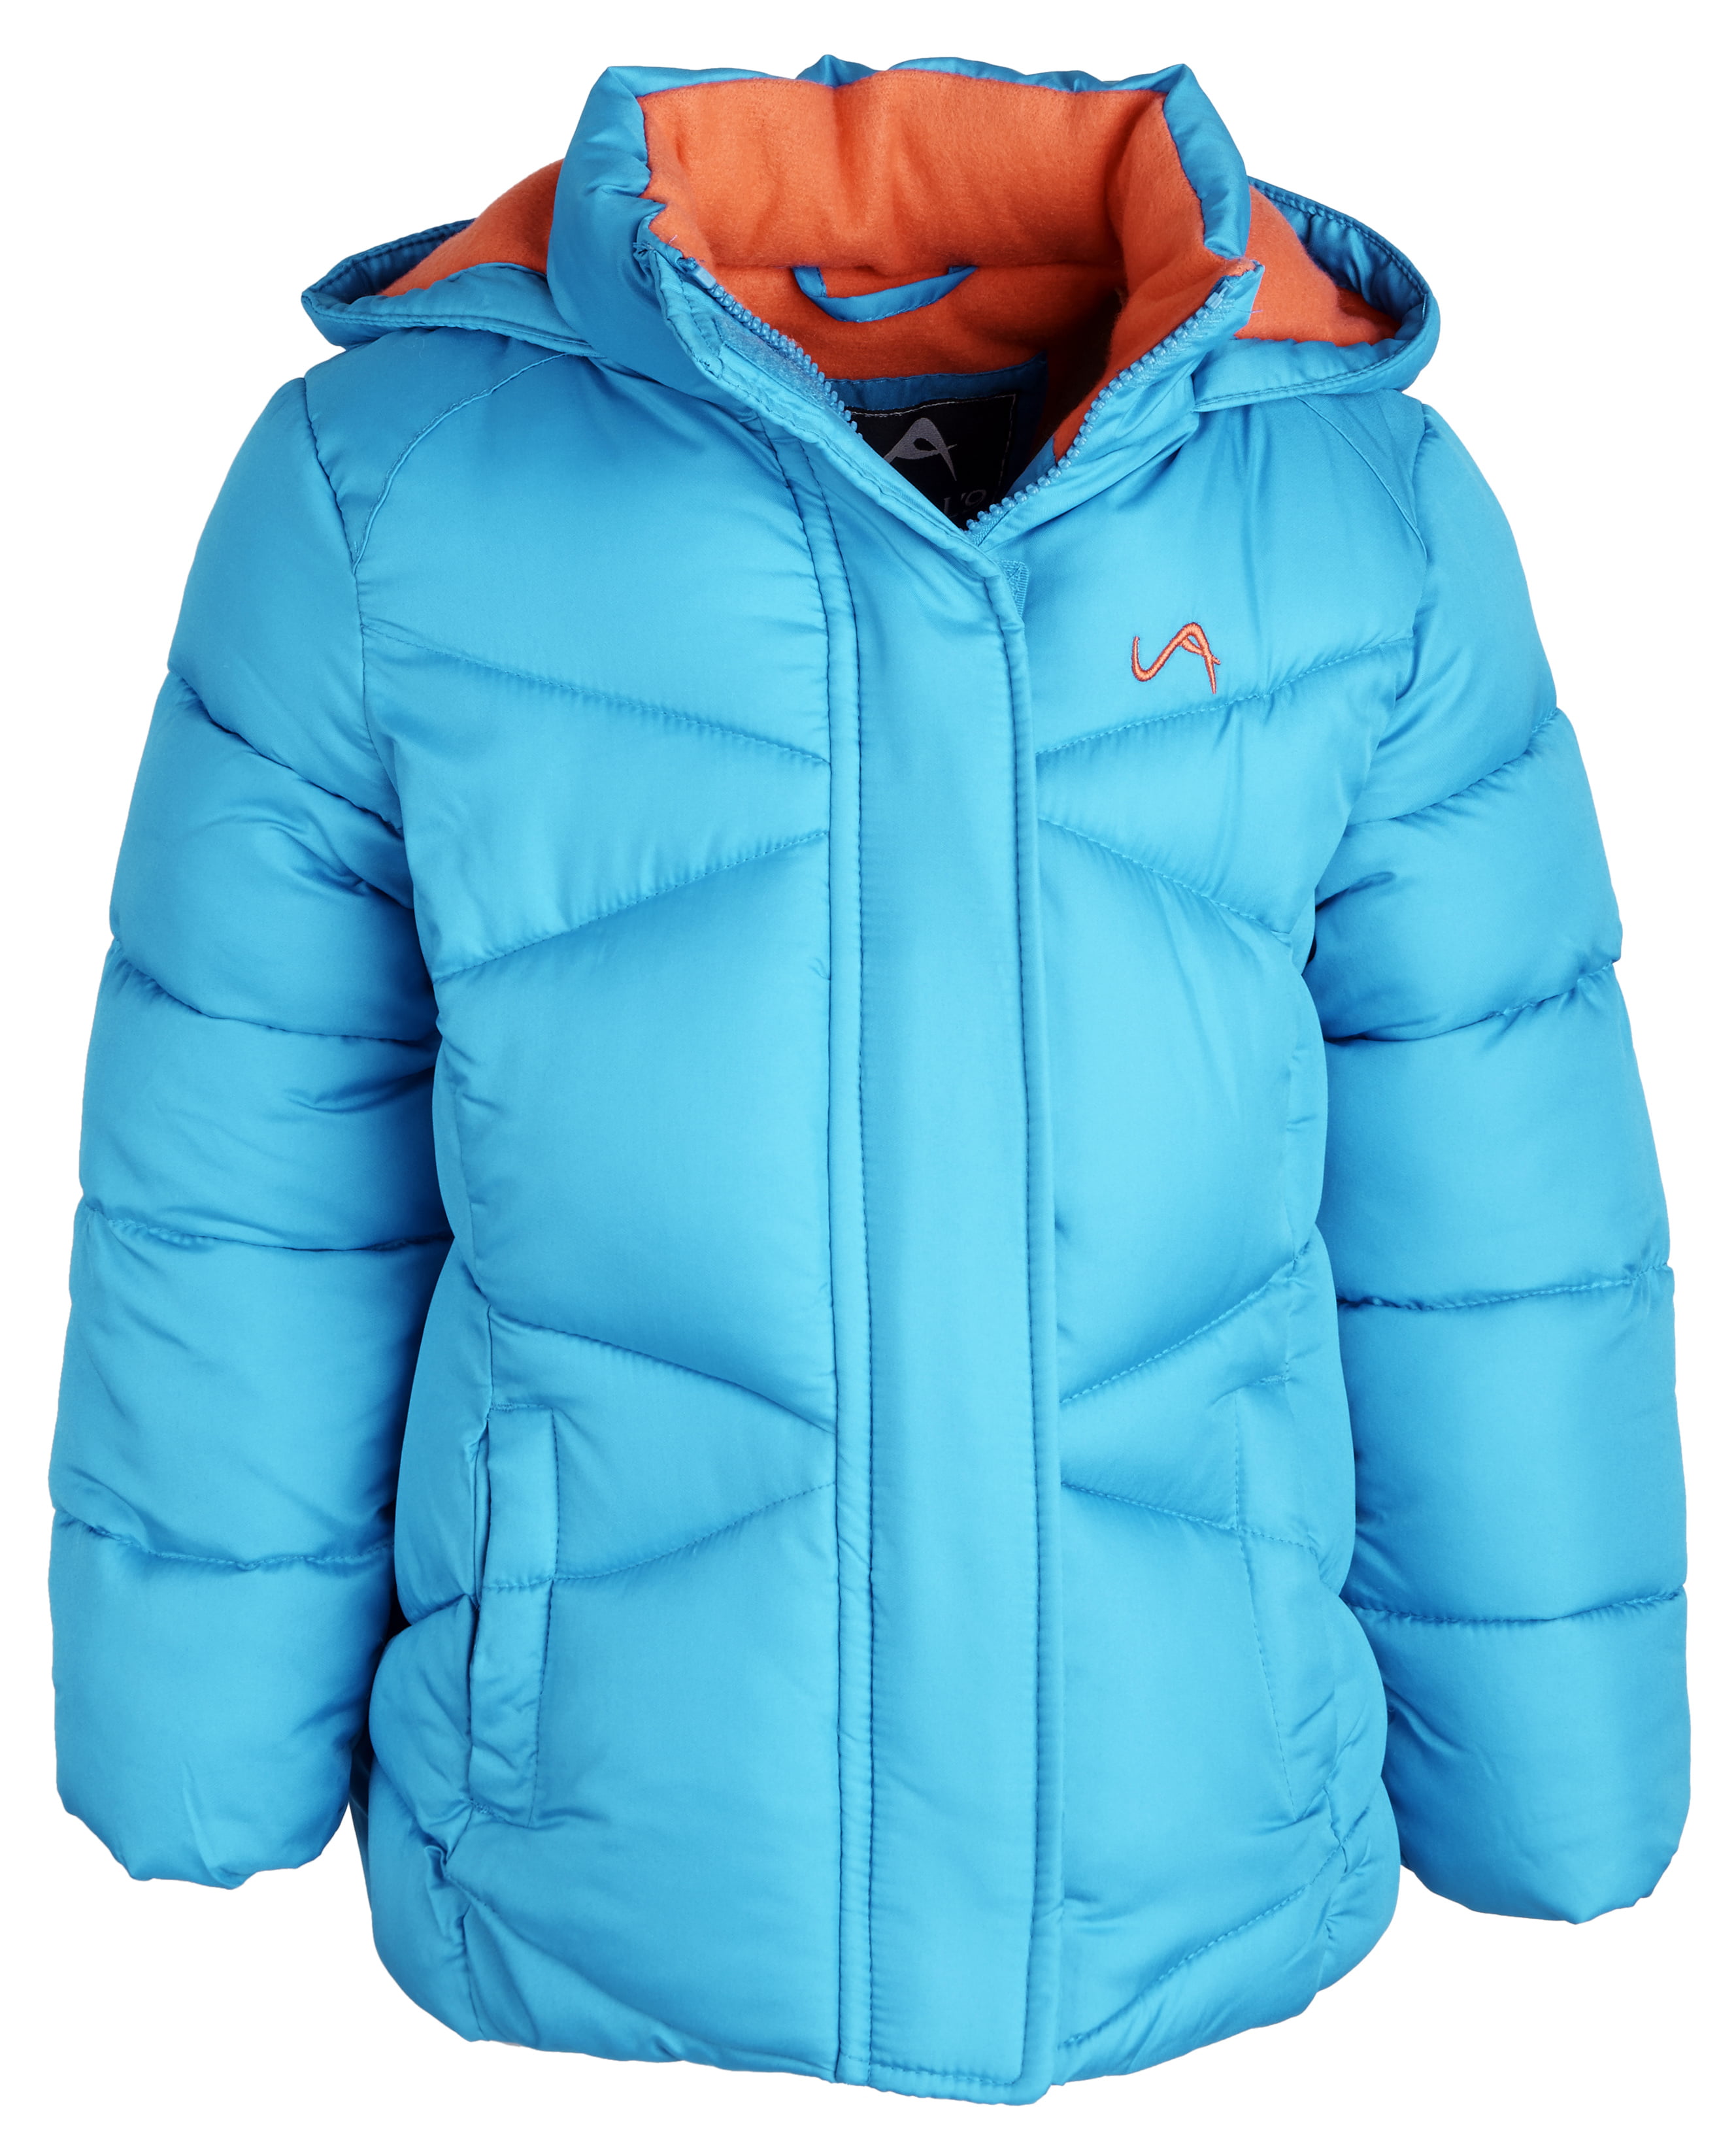 More Styles Available Vertical 9 boys Bubble Jacket 